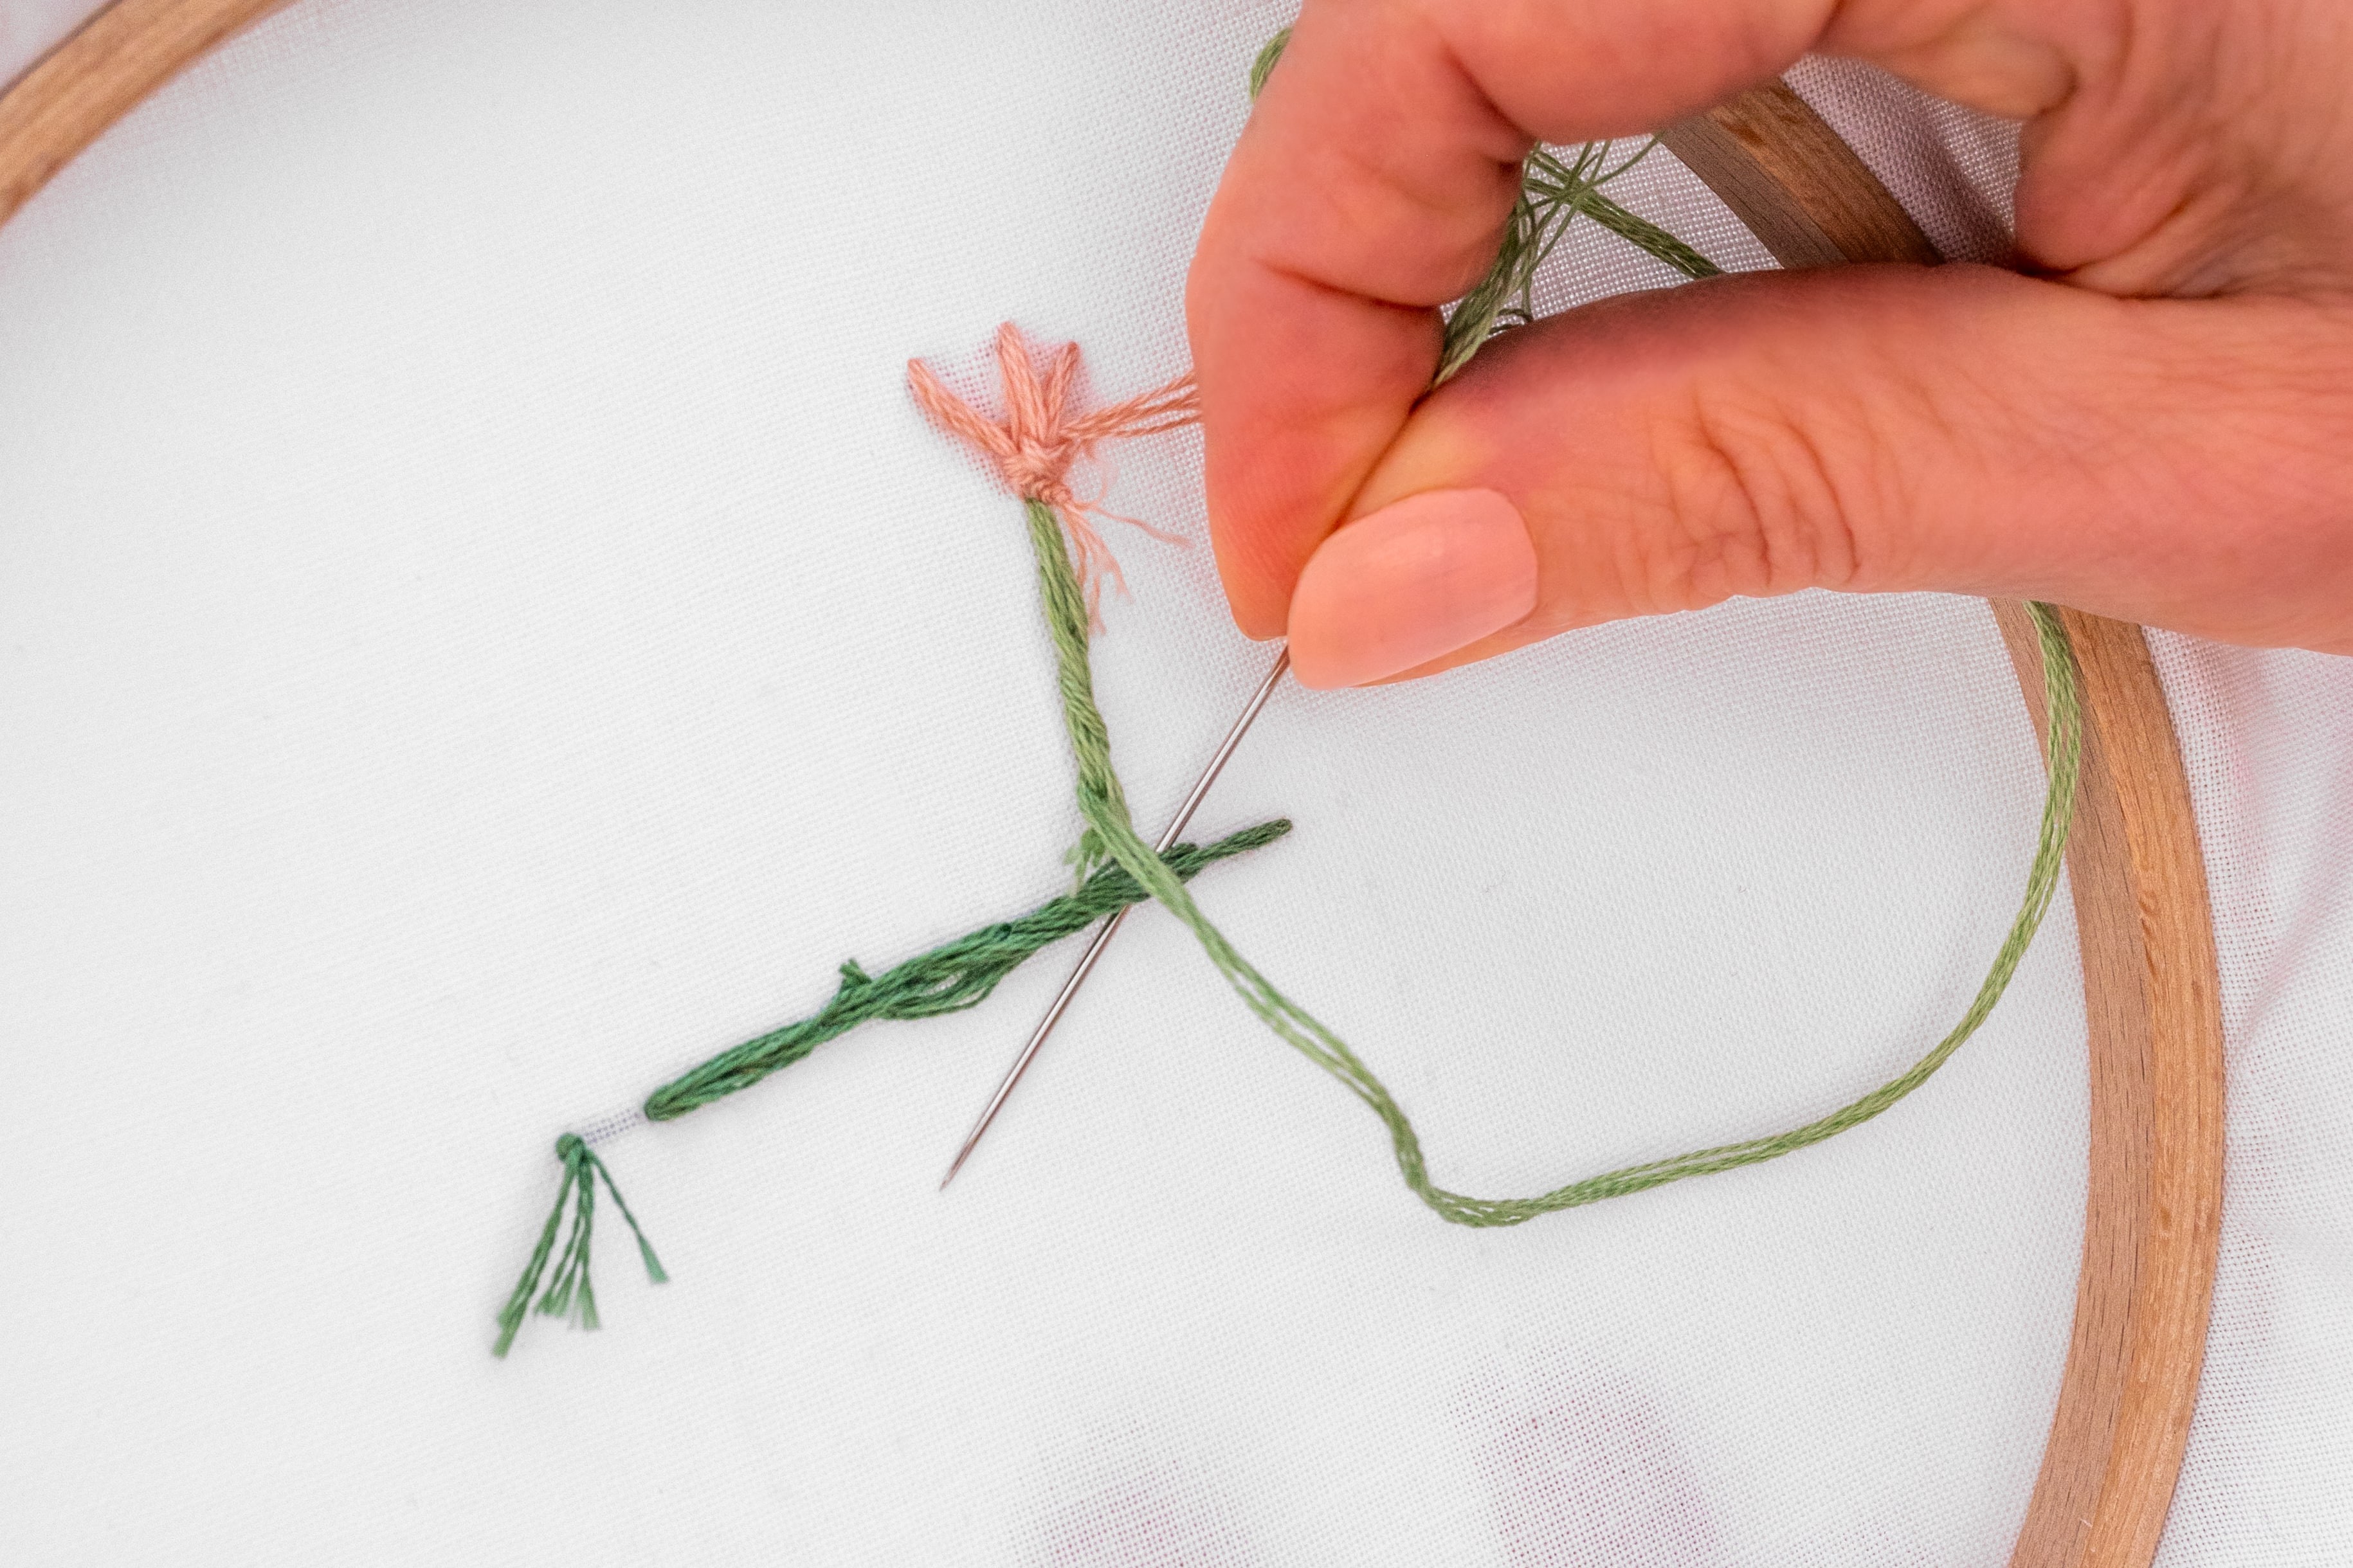 A hand brings a needle down through a bit of stitching.